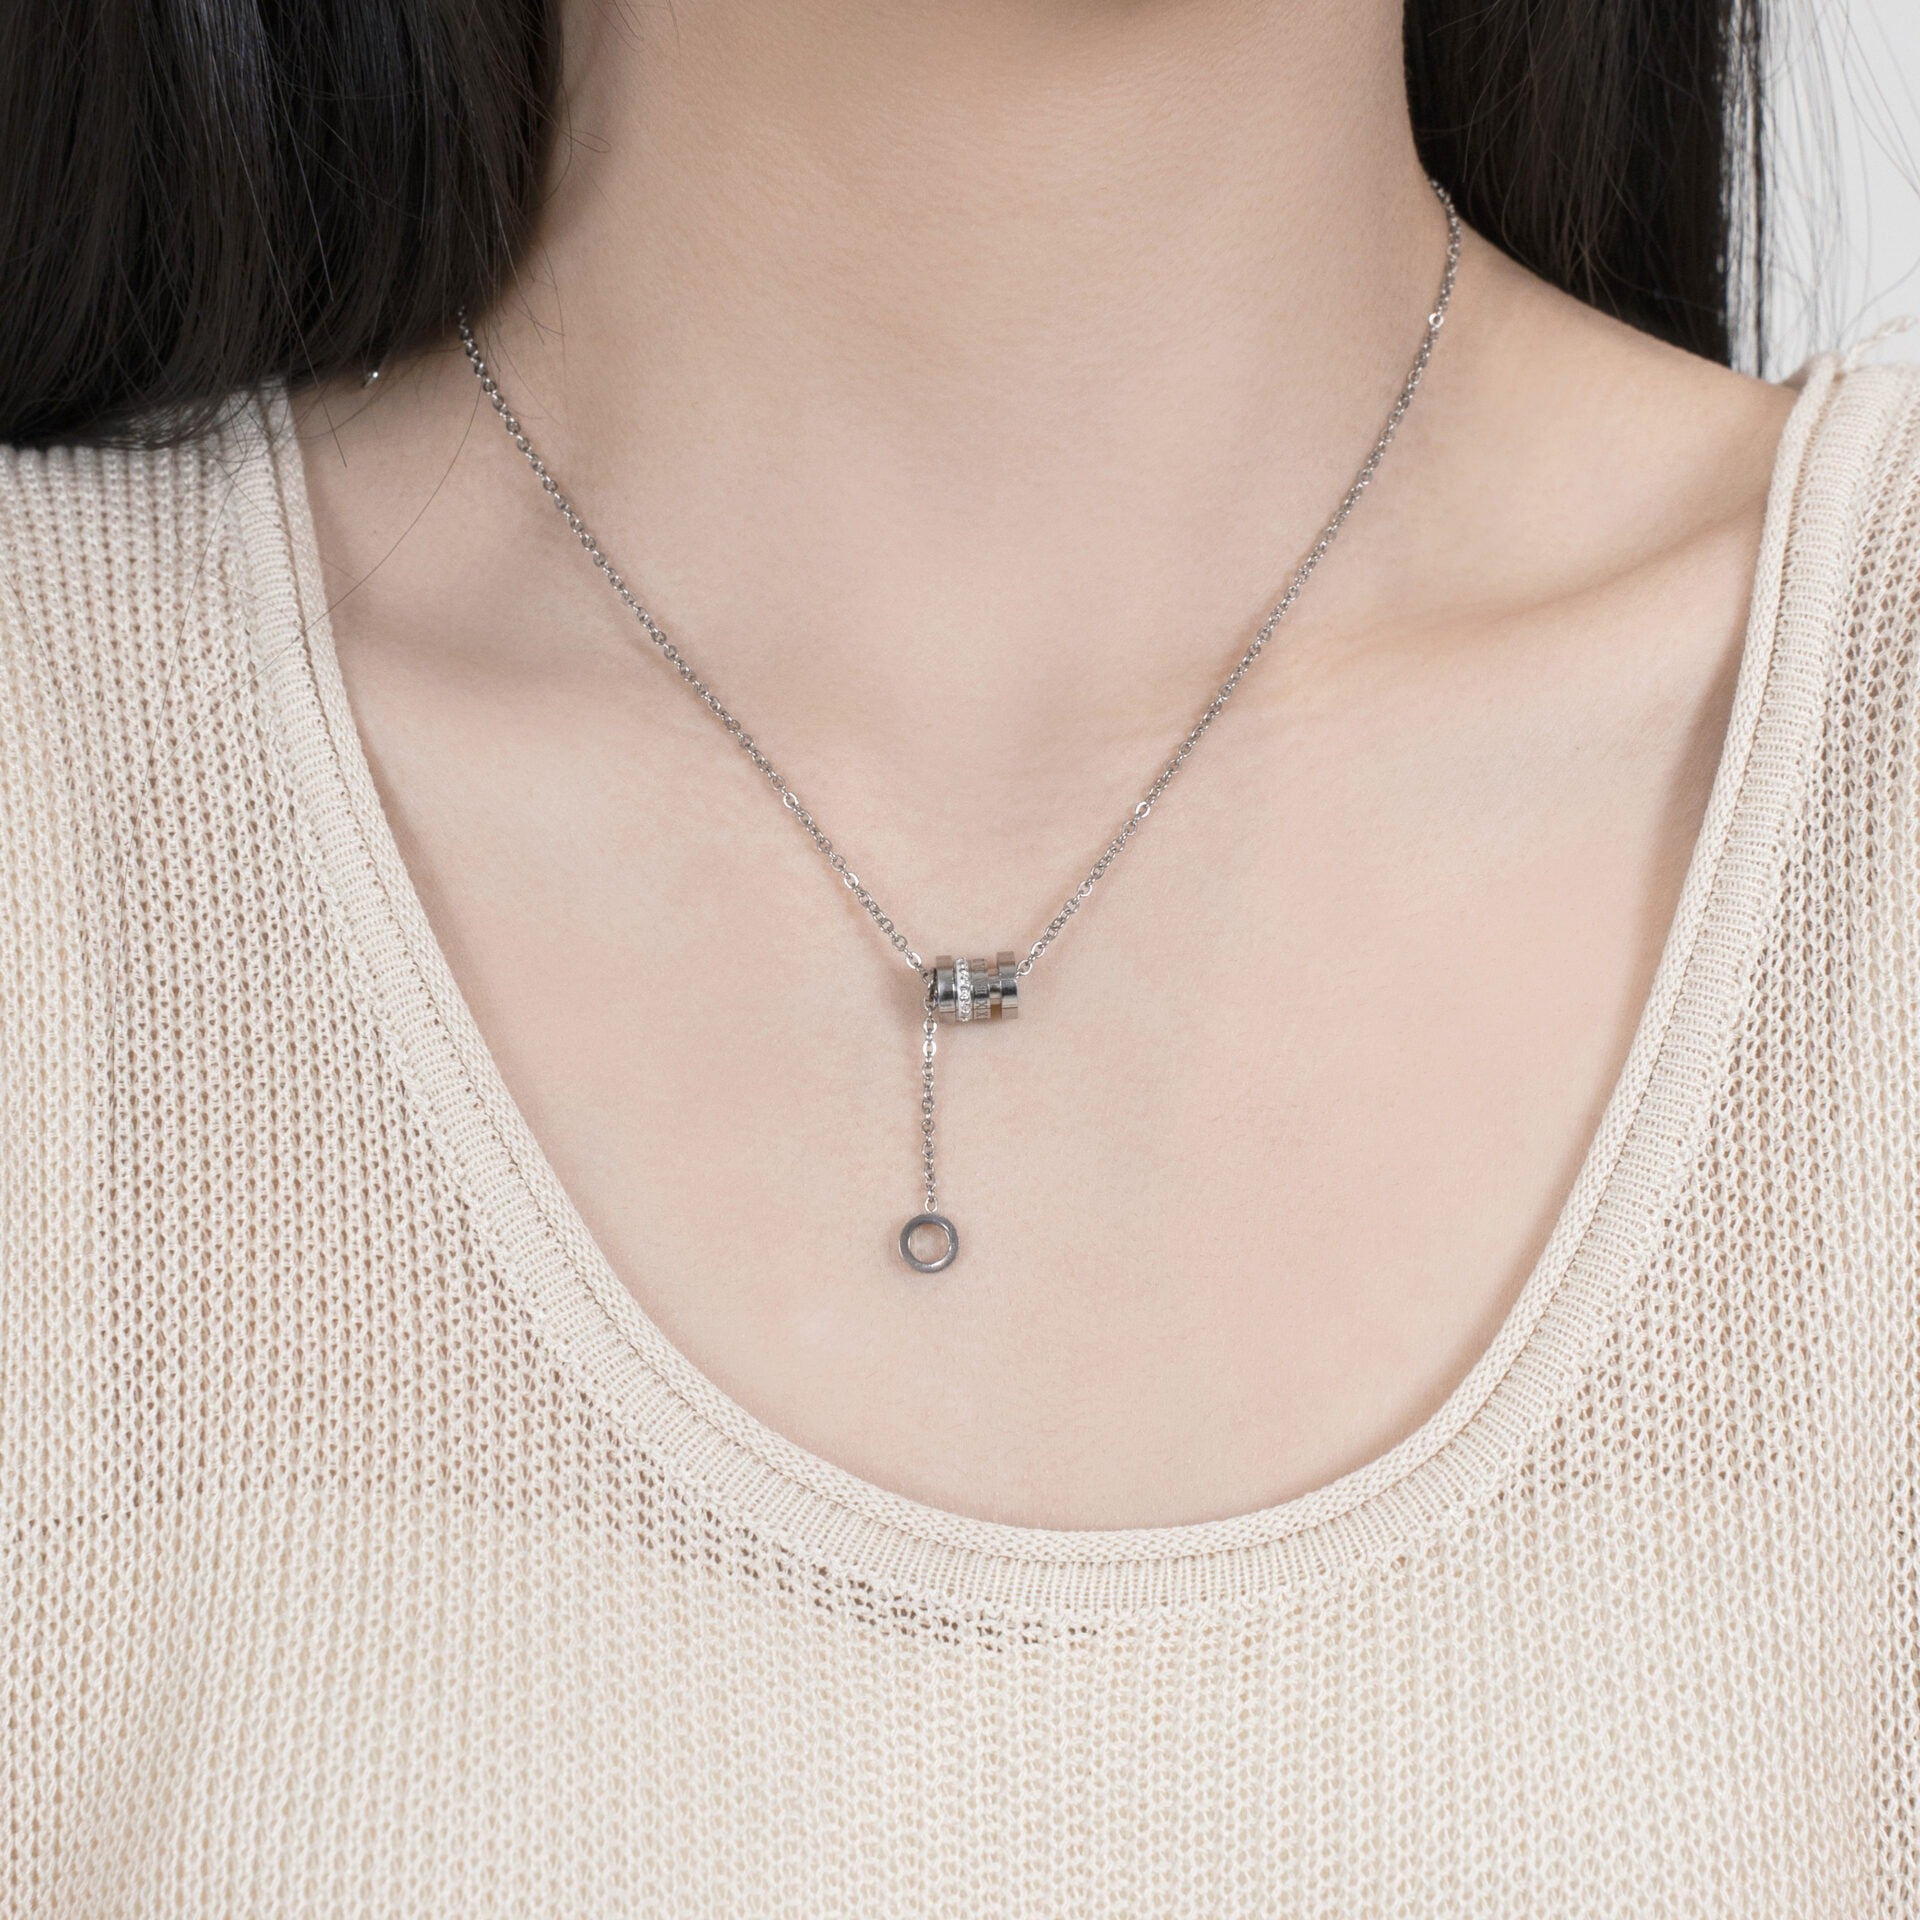 Charmé Necklace Collection Y-SHAPED PENDANT